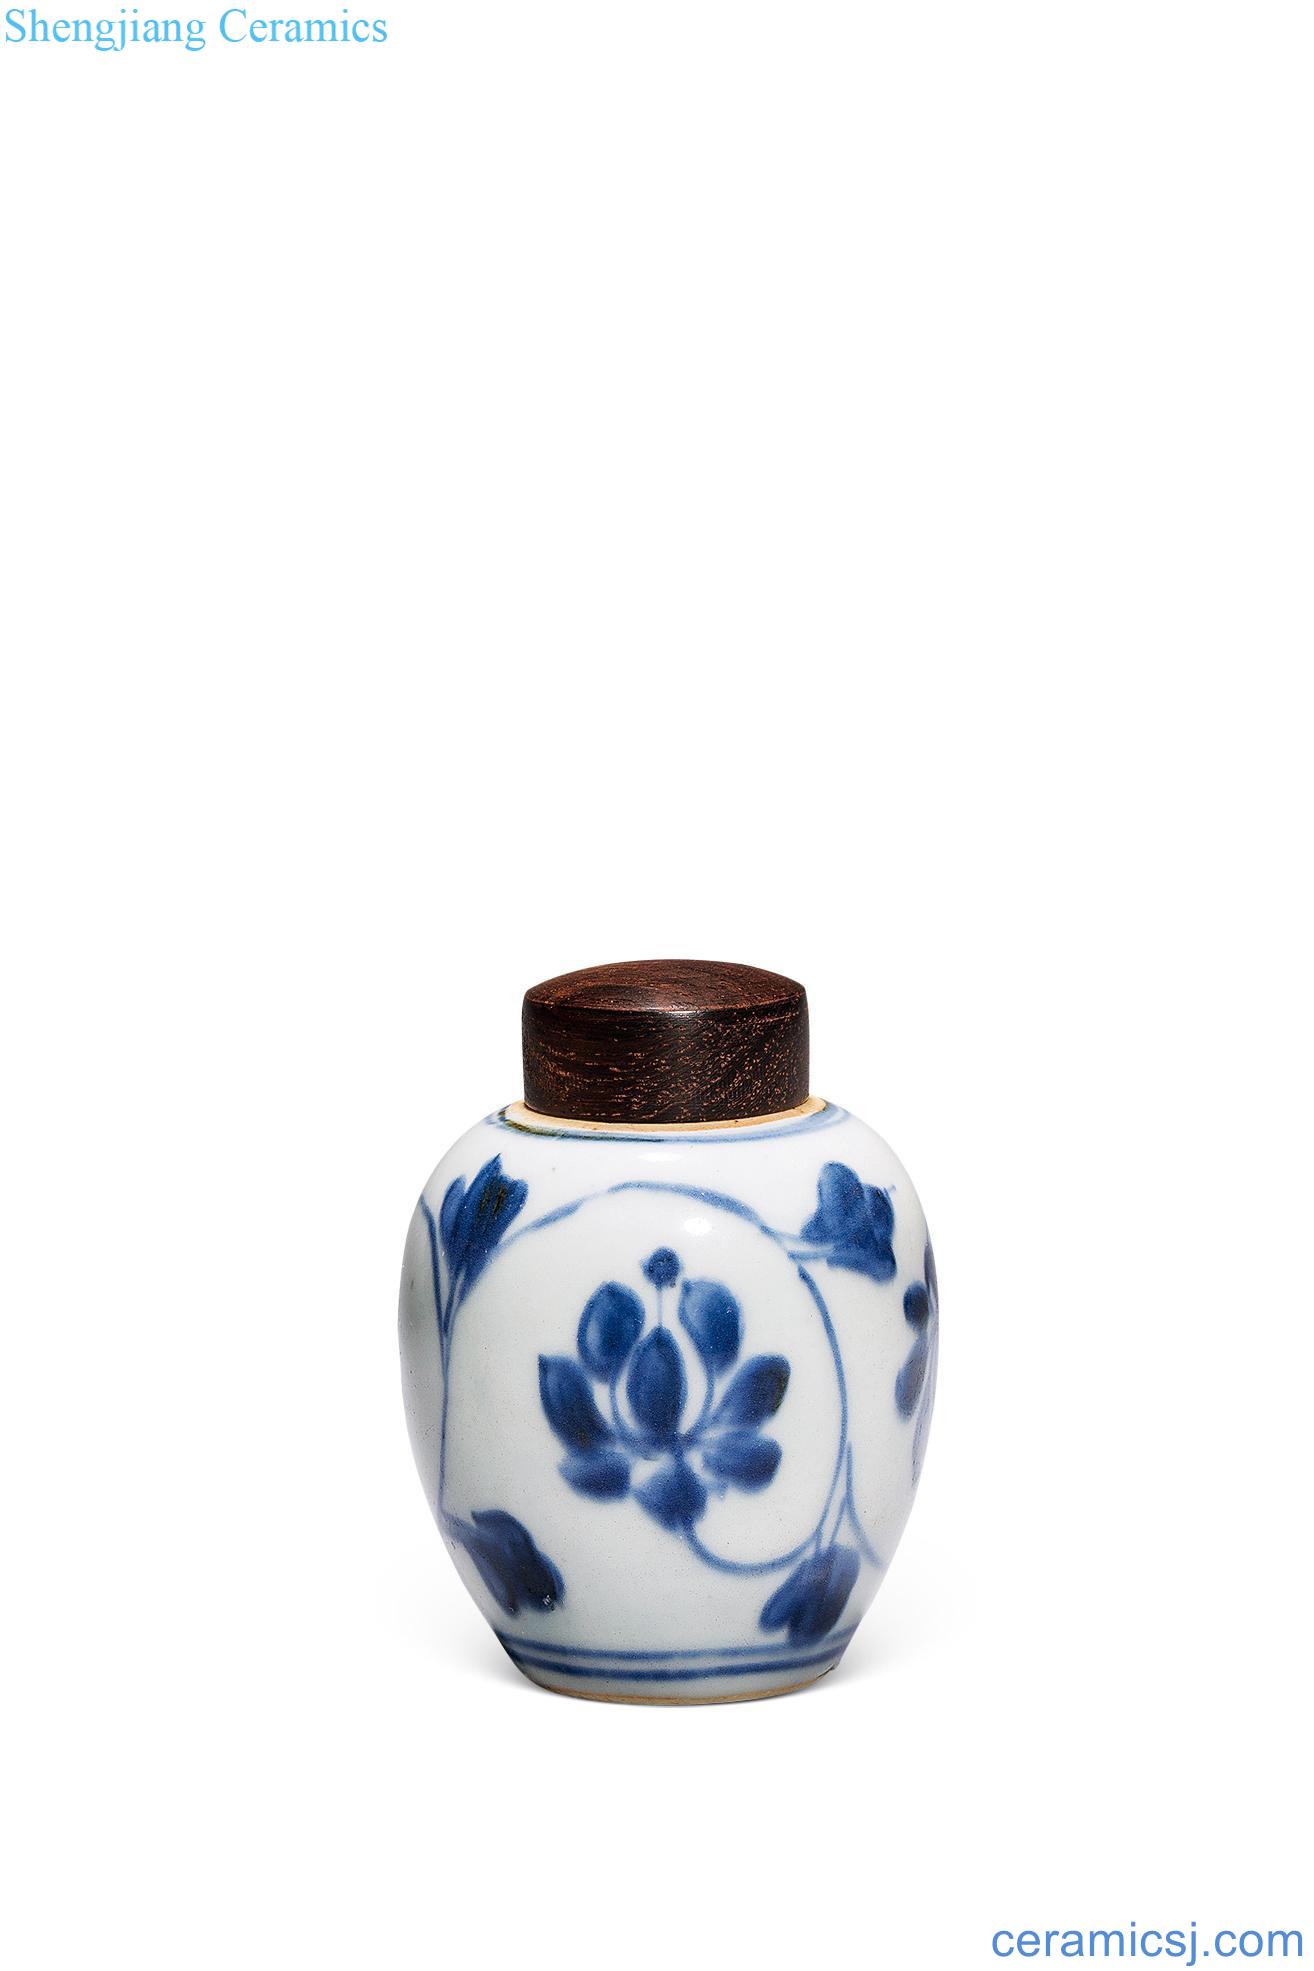 Early qing dynasty blue and white flower tattoos canister